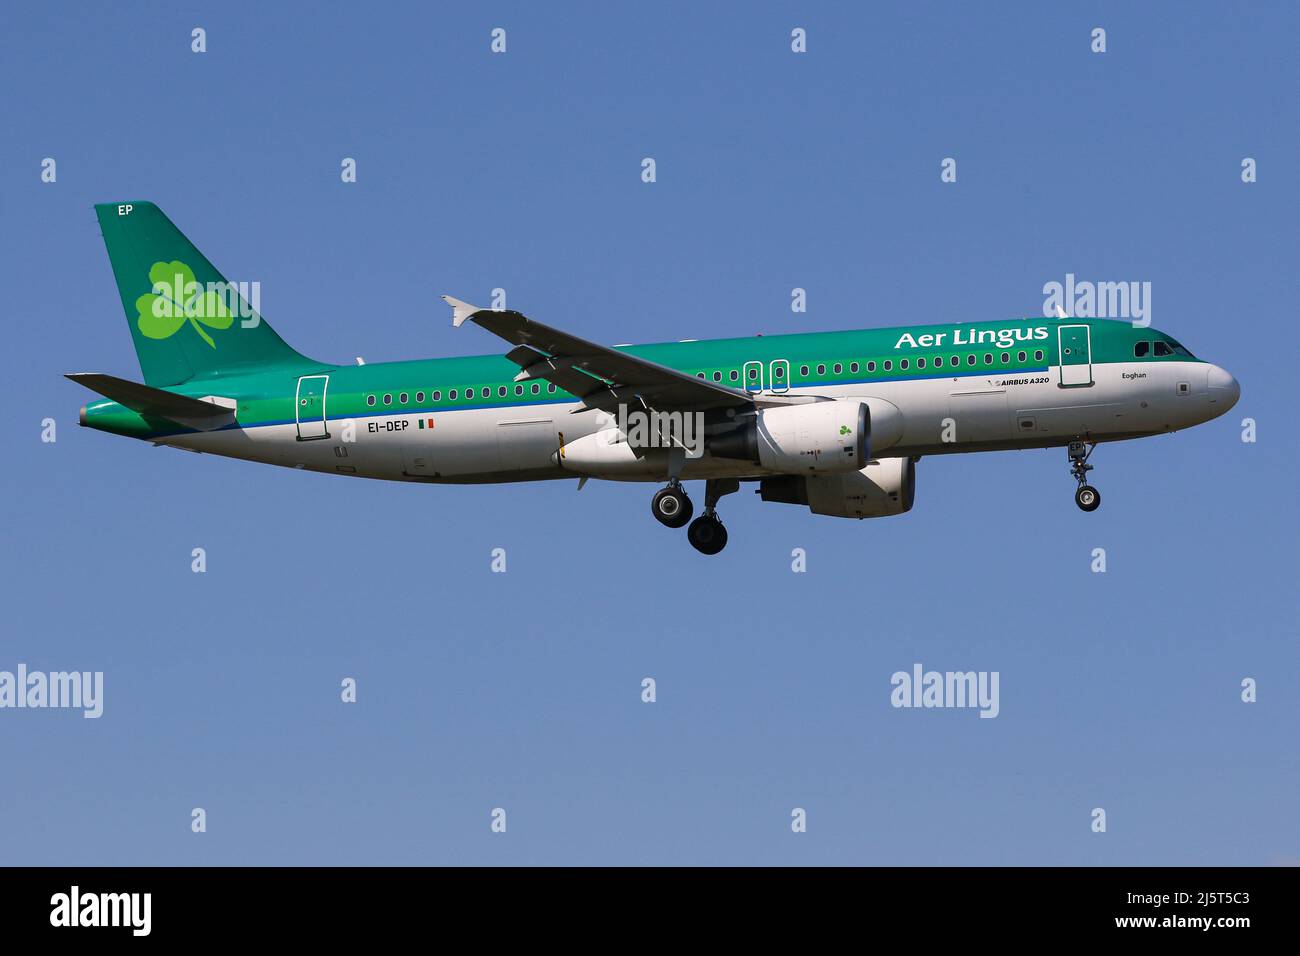 An Airbus A320 operated by Aer Lingus arrives at London Heathrow Airport Stock Photo